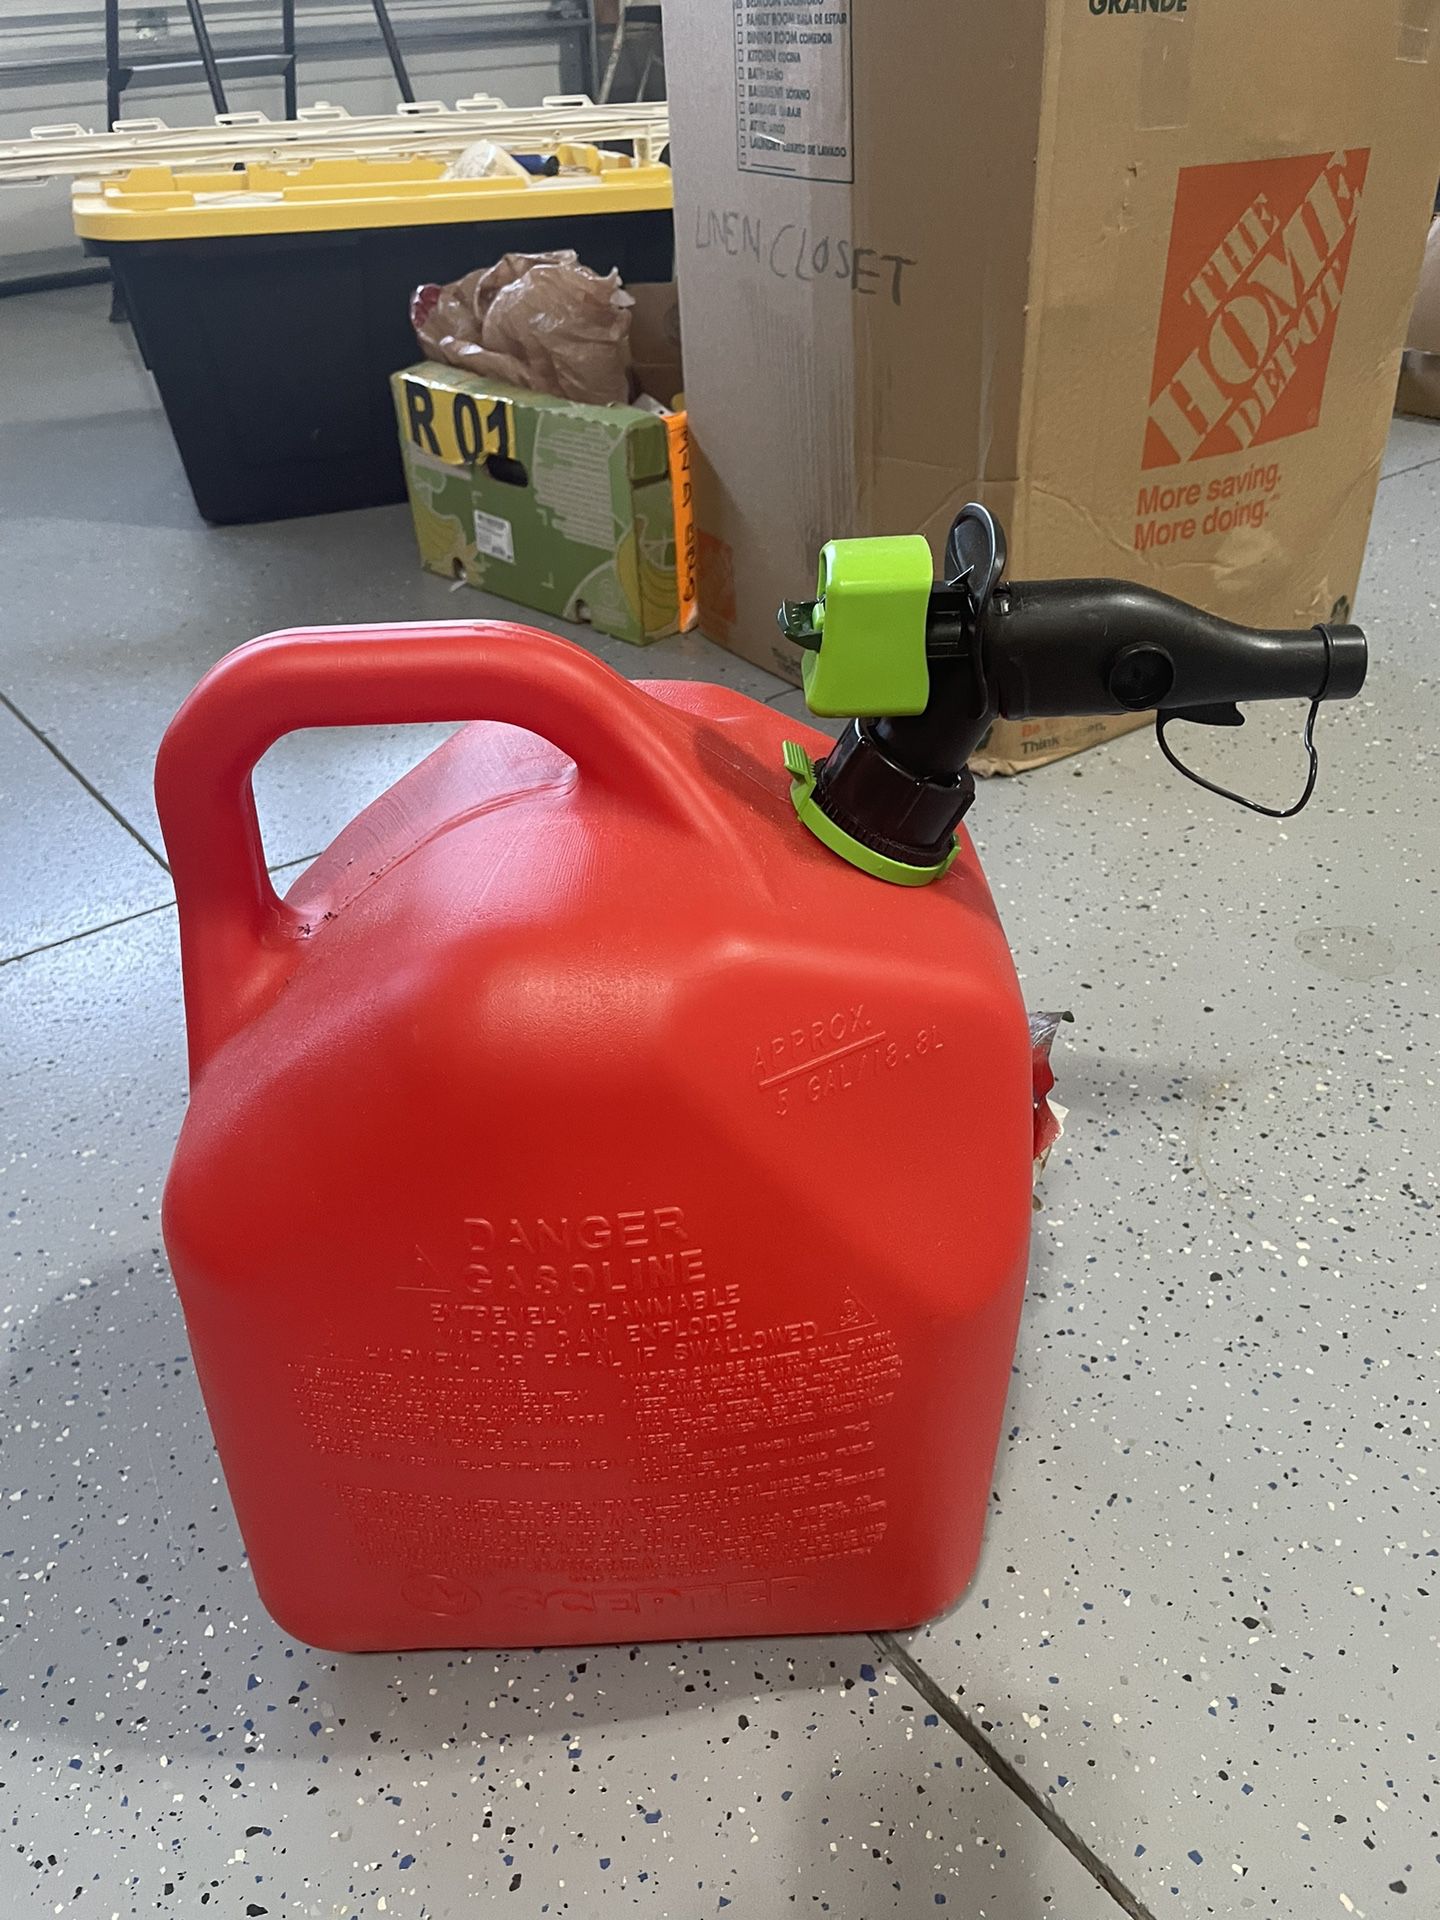 GAS Tank - 5 Gallons . barely Used